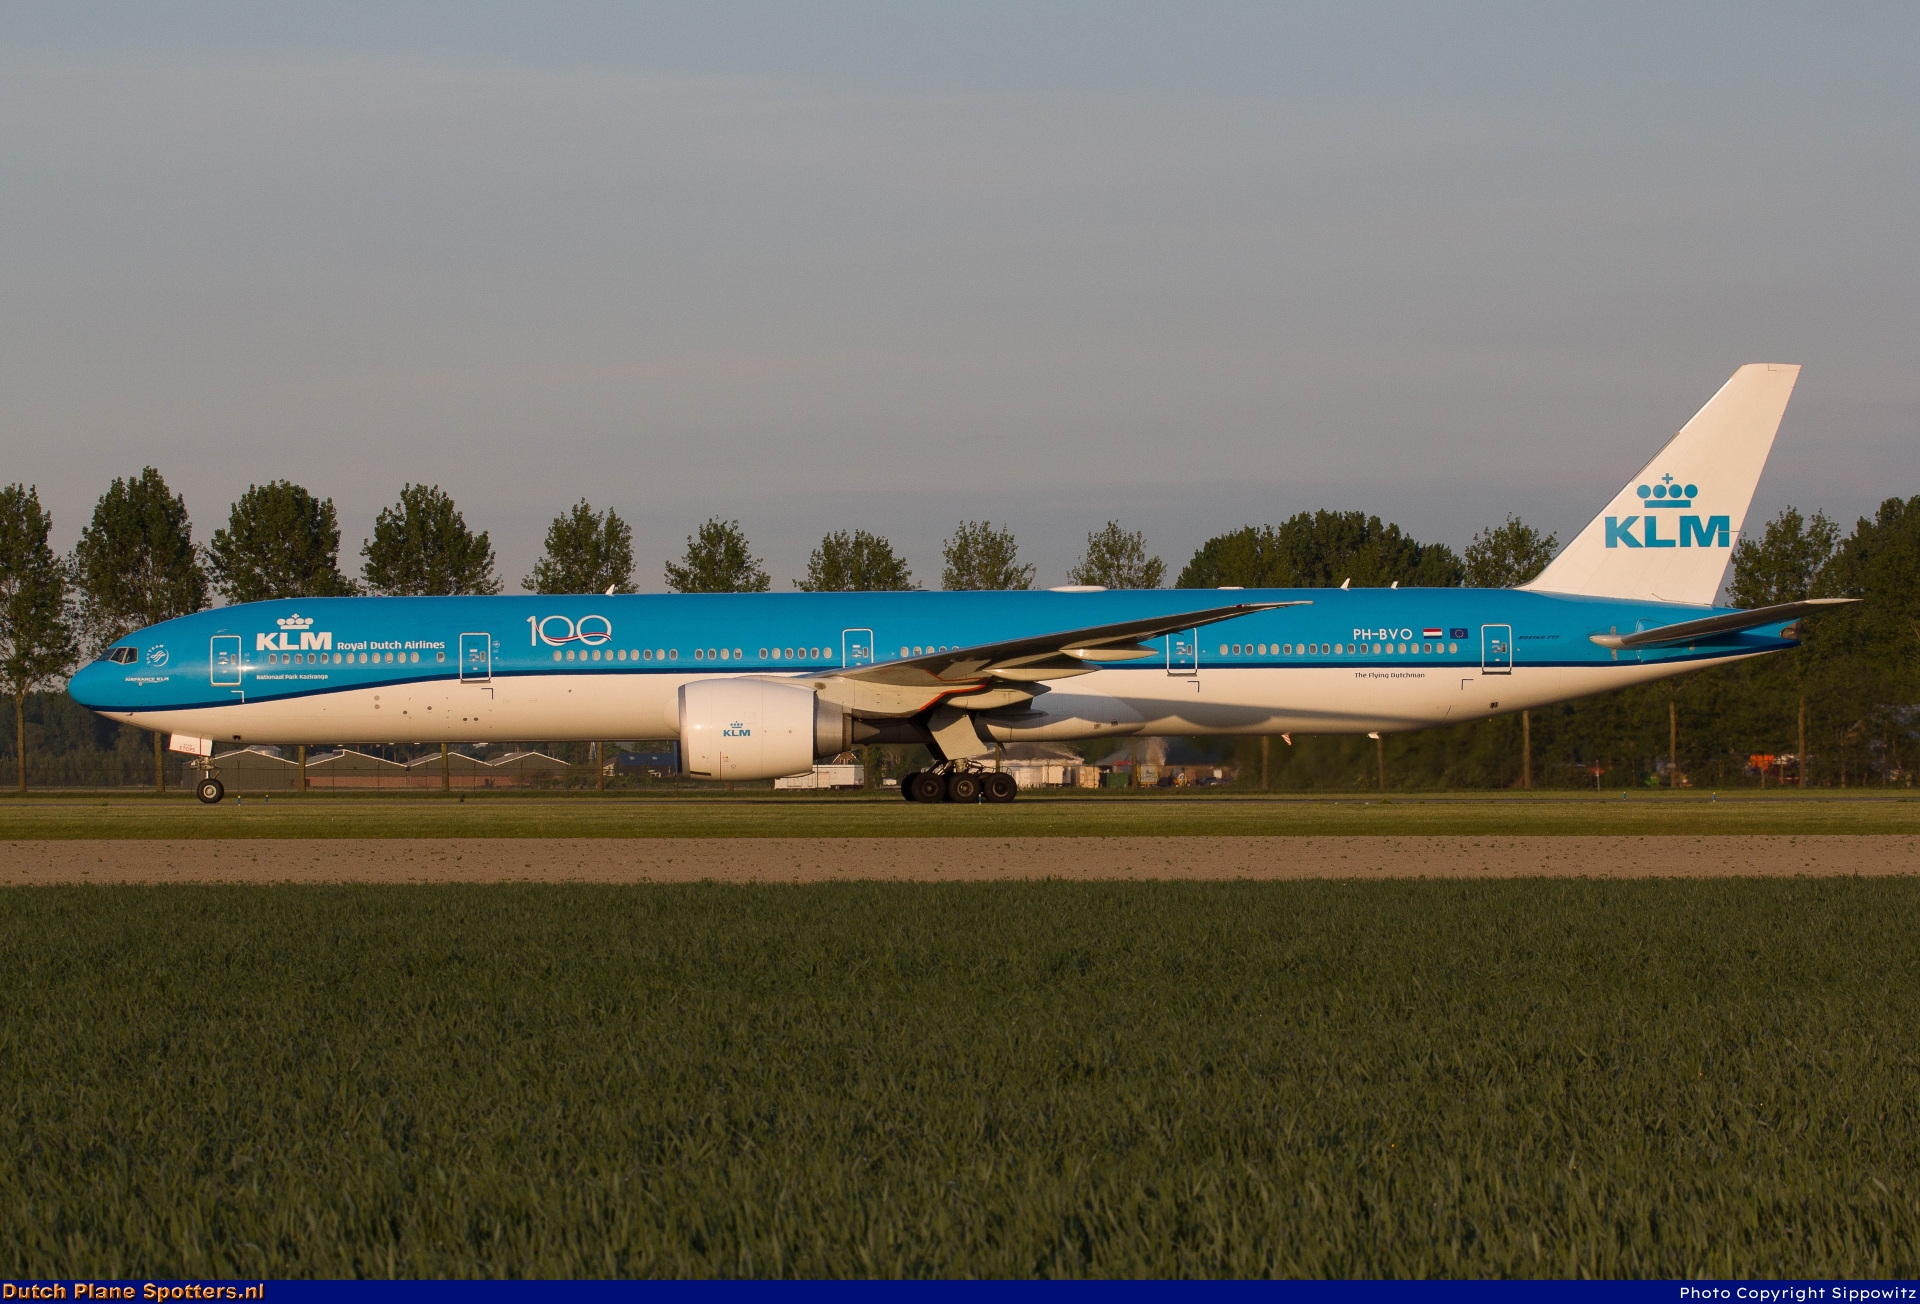 PH-BVO Boeing 777-300 KLM Royal Dutch Airlines by Sippowitz